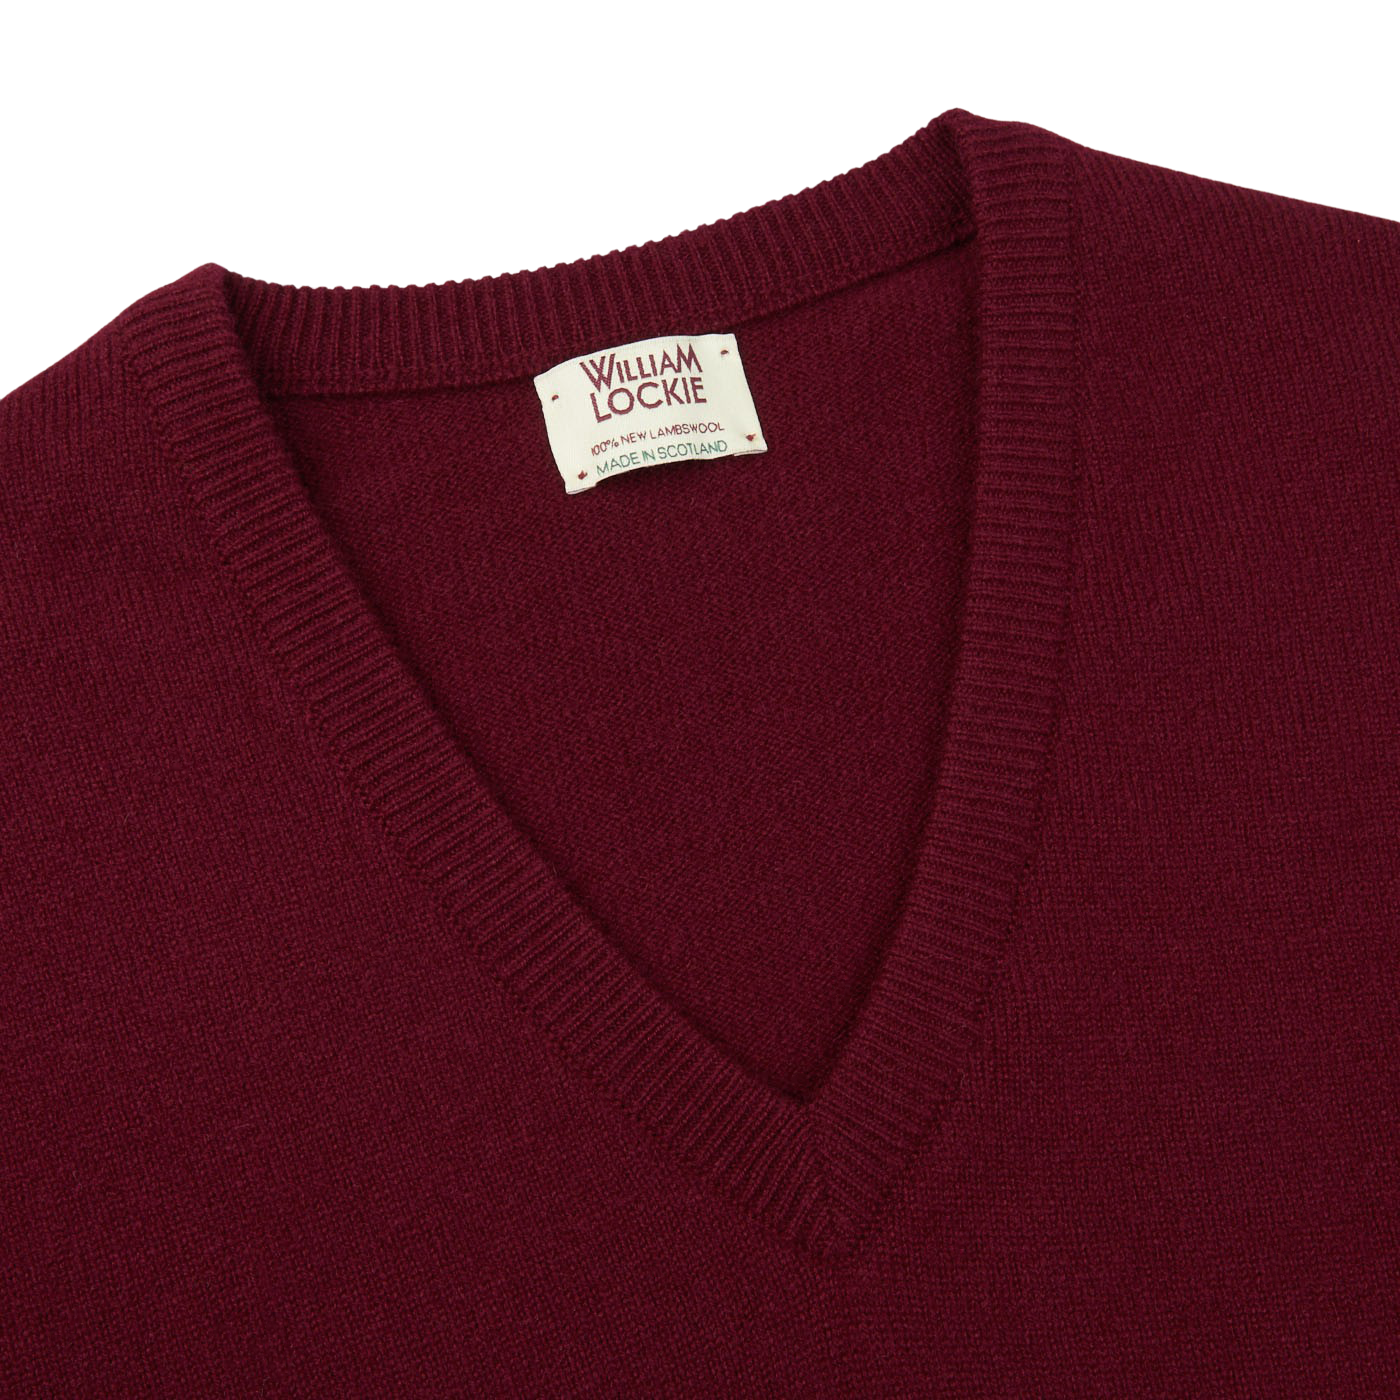 The William Lockie Bordeaux V-Neck Lambswool Sweater.